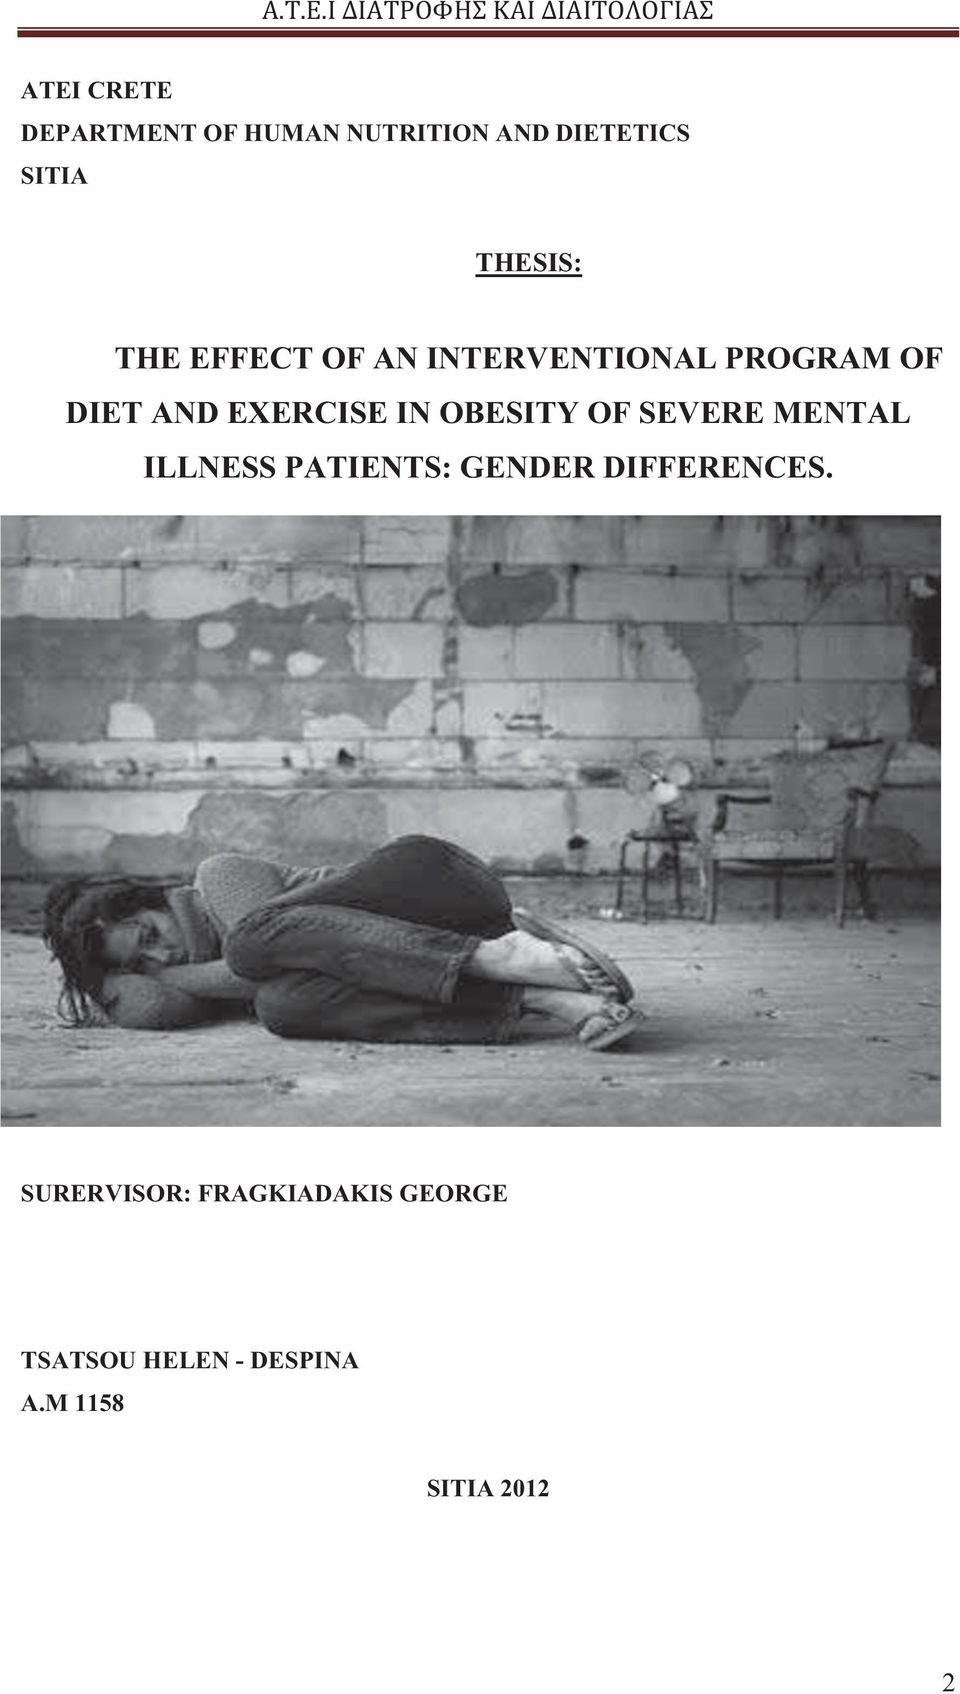 OBESITY OF SEVERE MENTAL ILLNESS PATIENTS: GENDER DIFFERENCES.